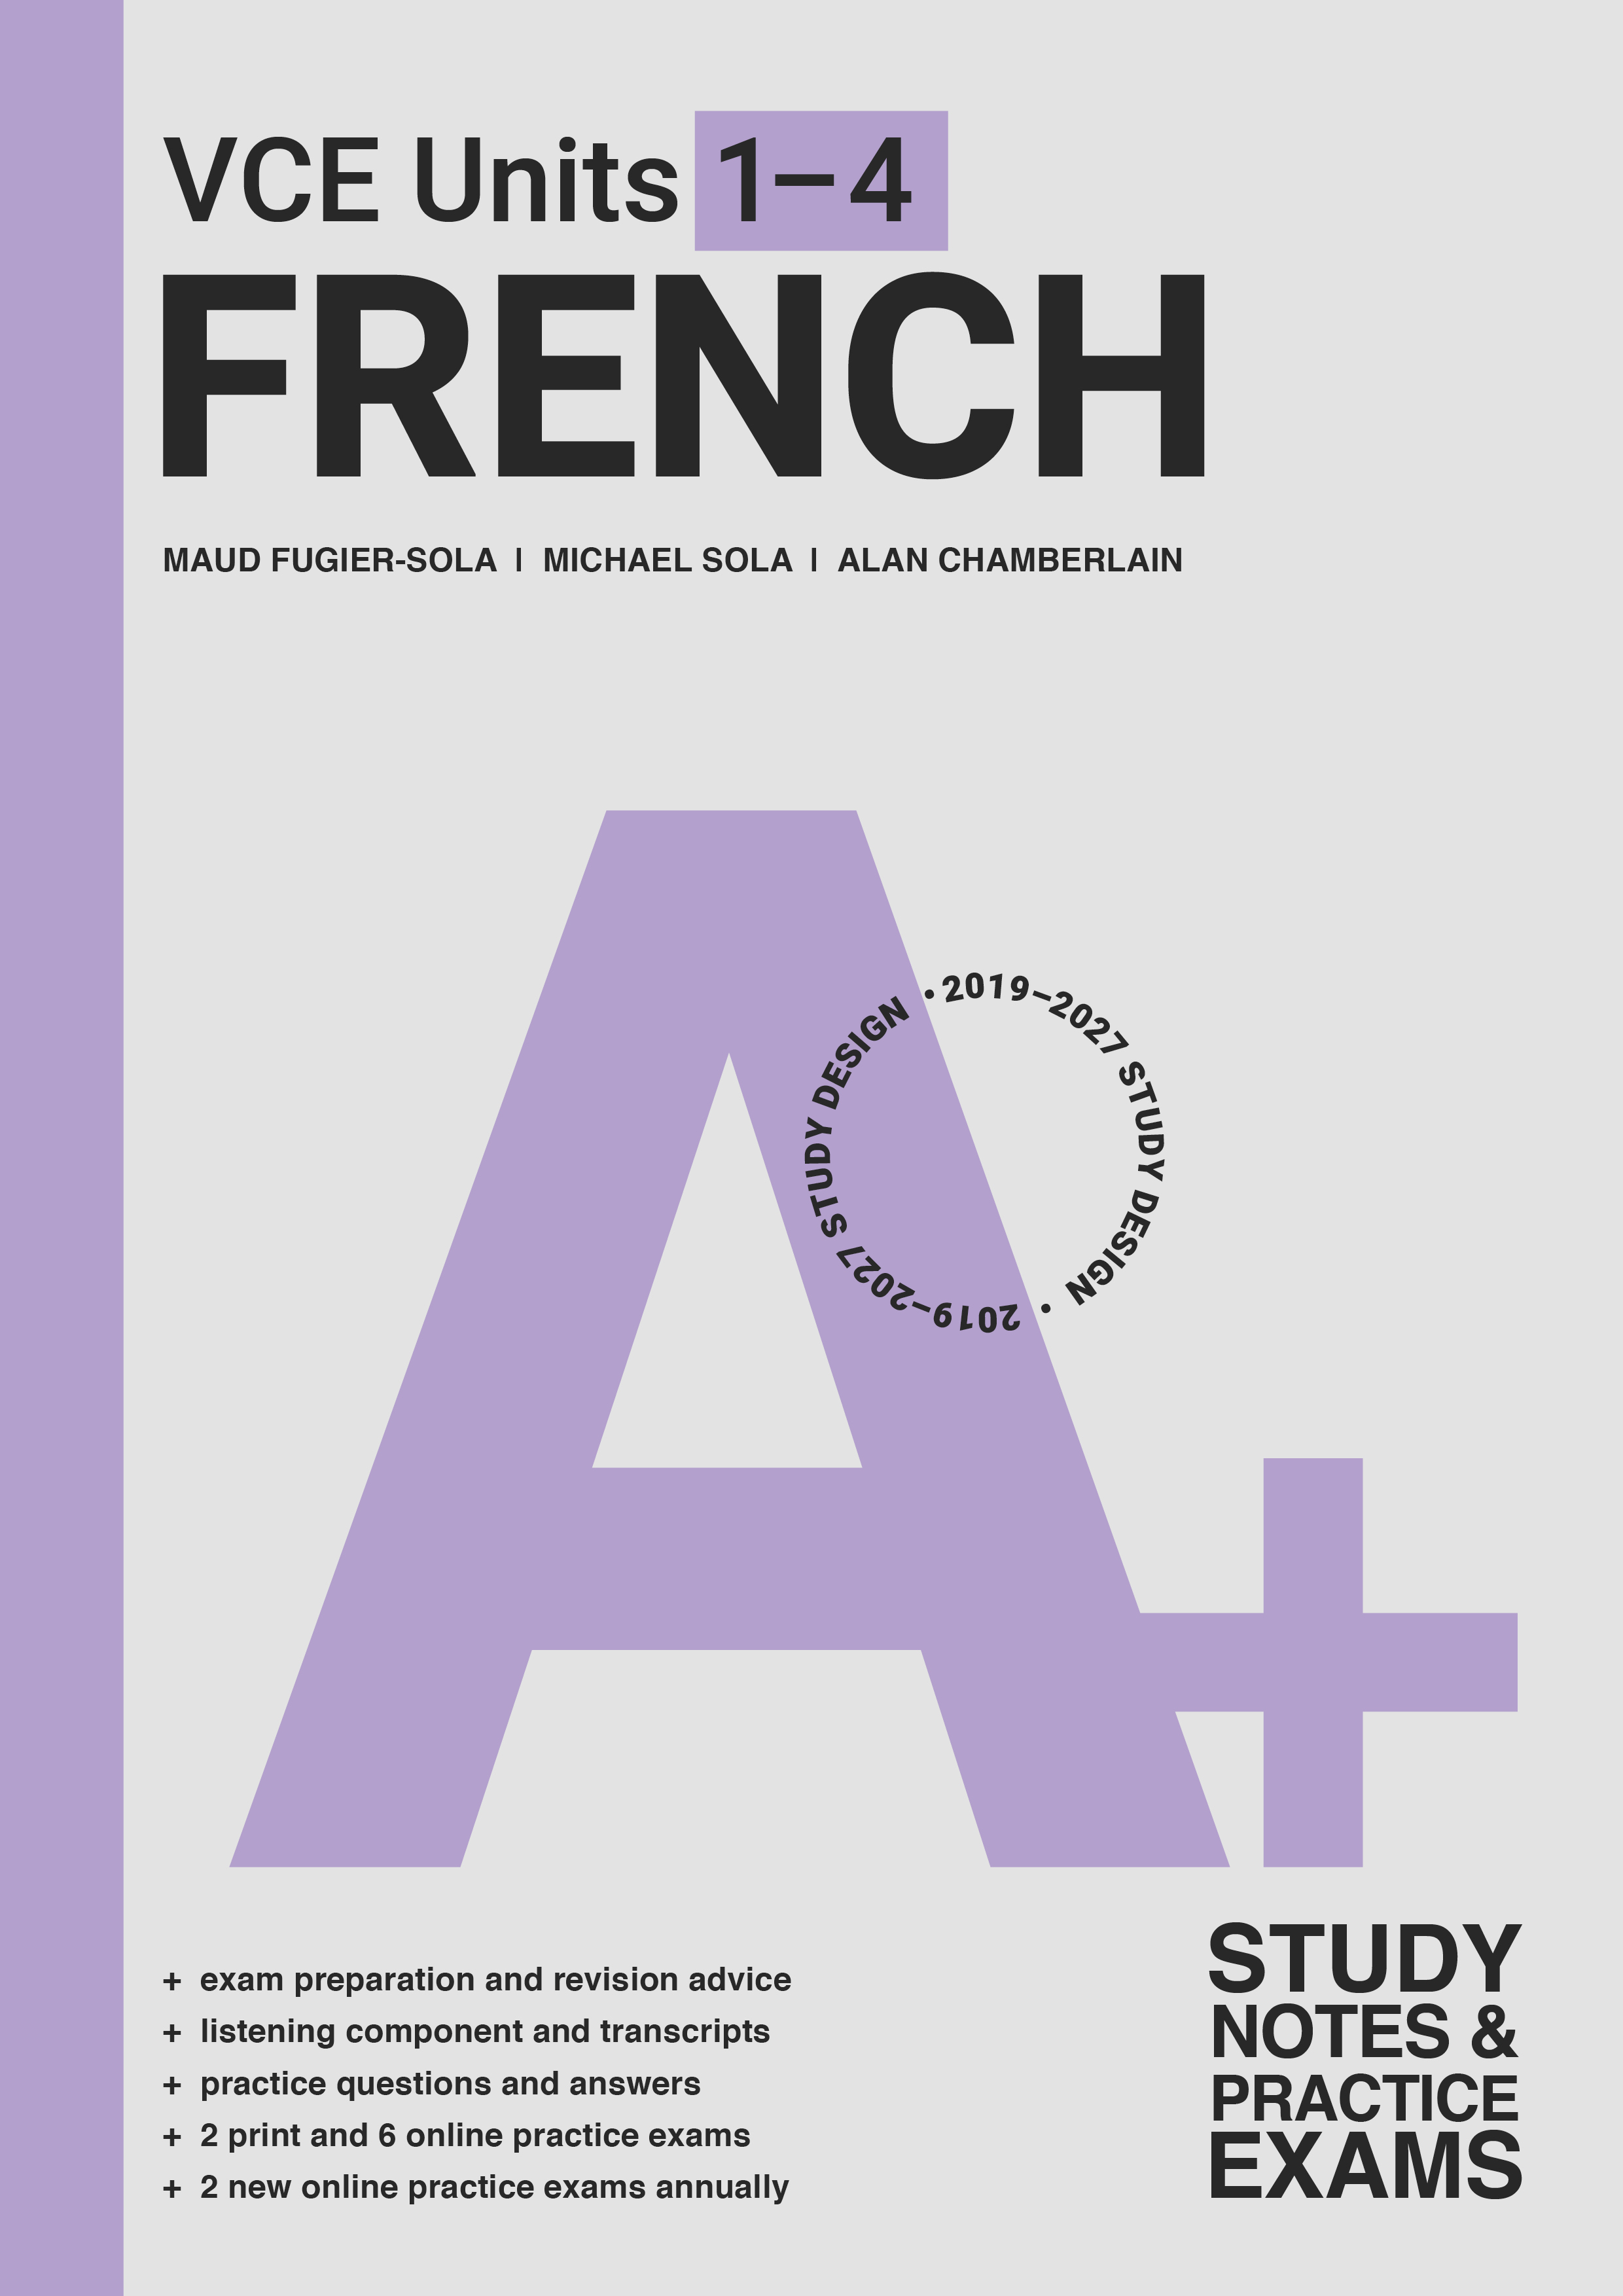 A+VCE French Study Guide